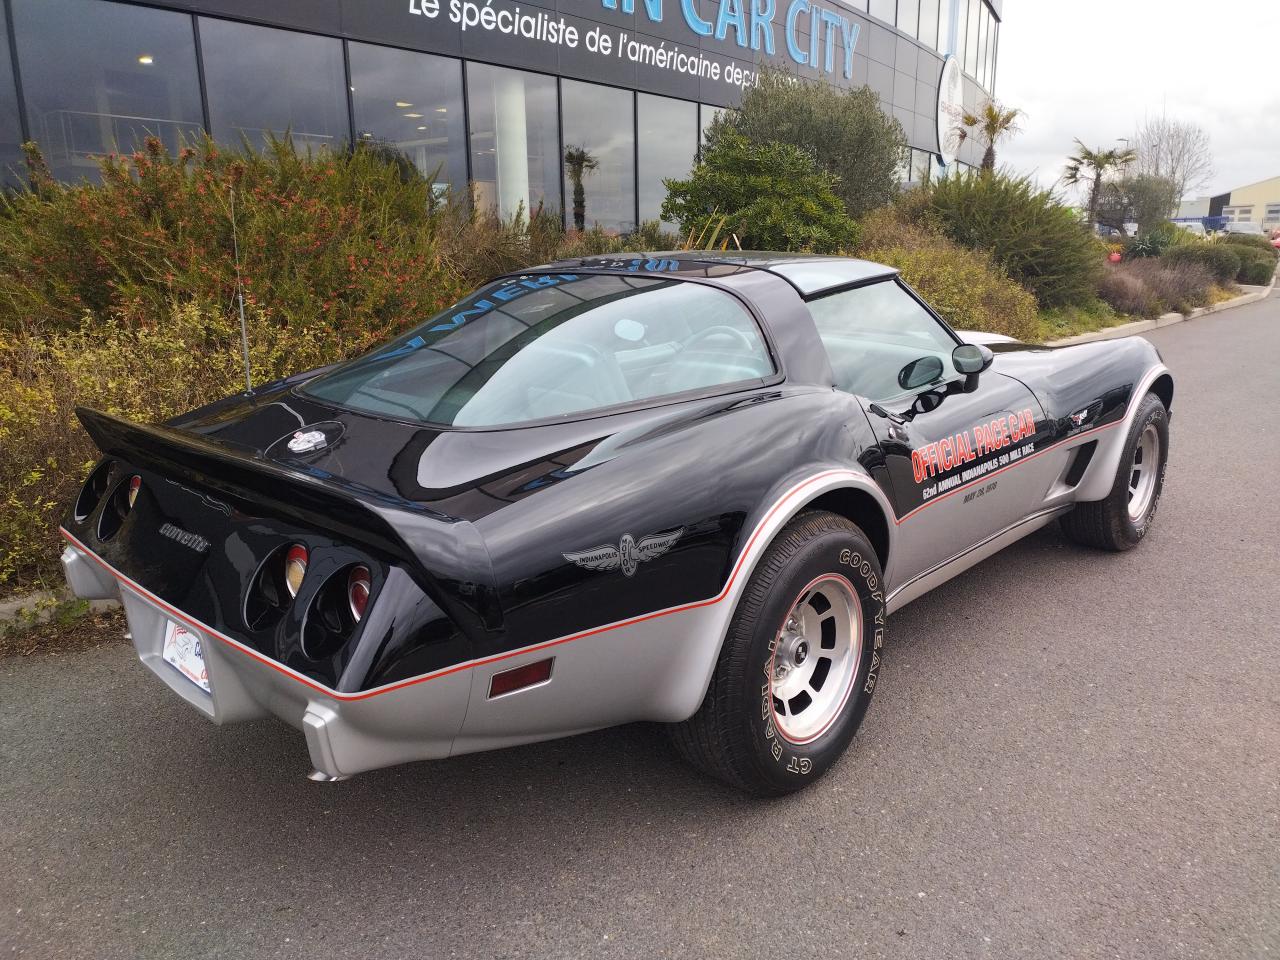 CHEVROLET CORVETTE C3 PACE CAR TURBO MATCHING NUMBERS